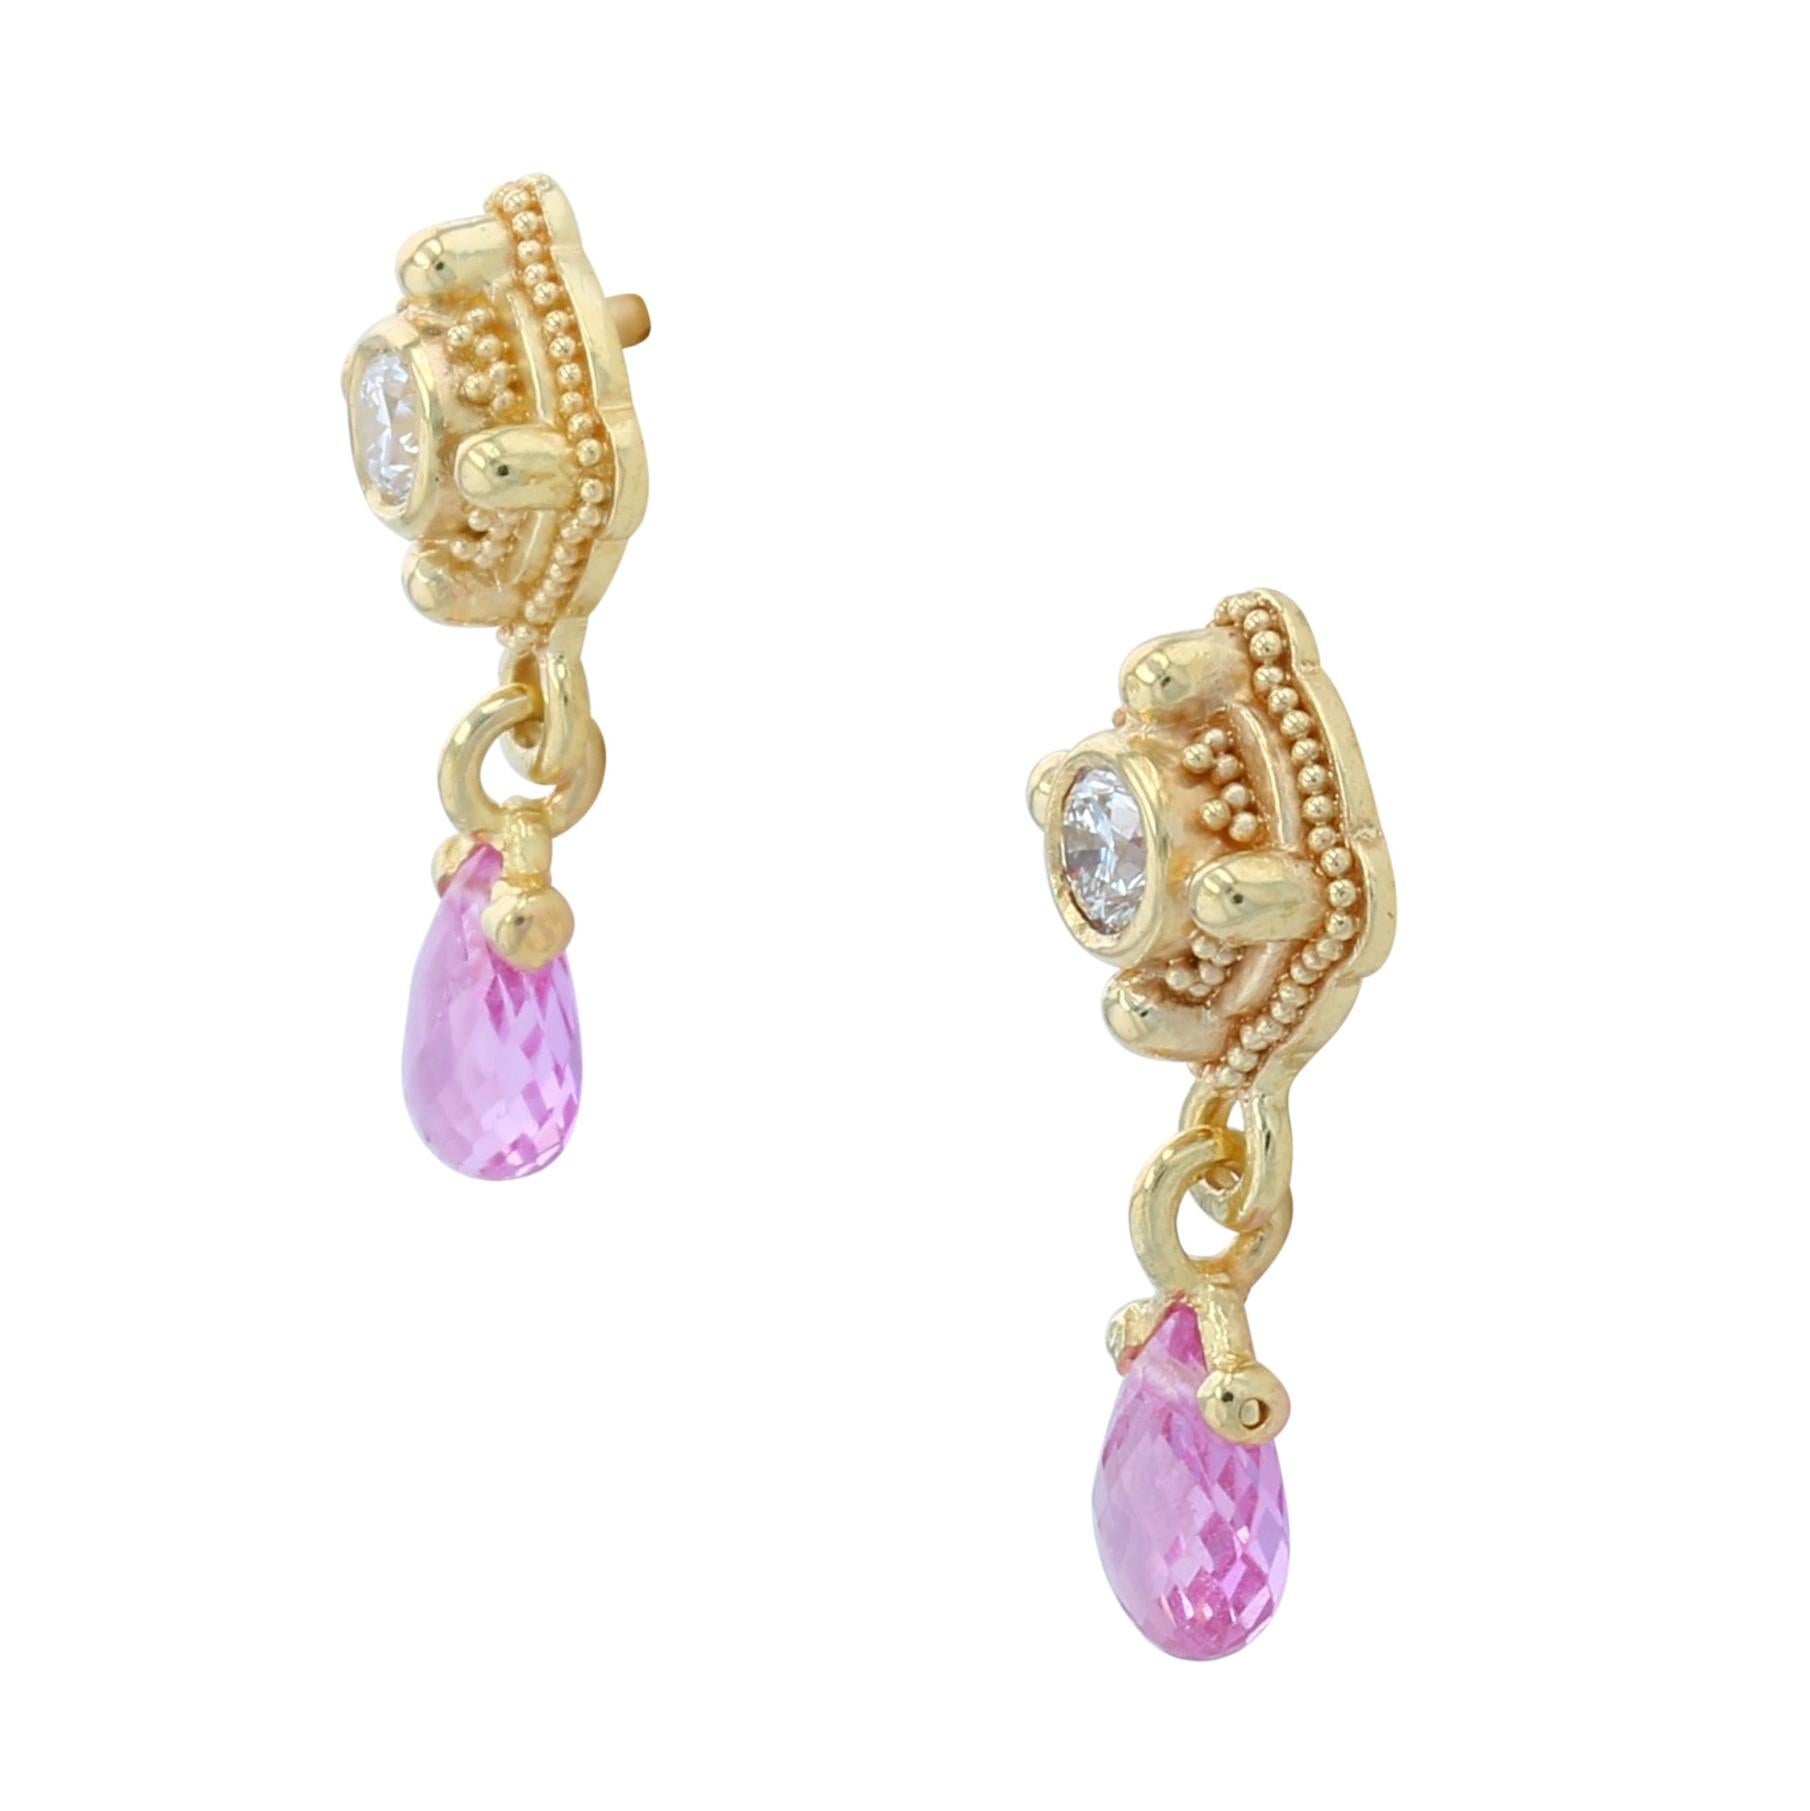 From Kent Raible the limited edition 'Studio Collection' we bring you his intricately detailed Diamond stud earrings with the elegant drop of Pink Sapphire briolets.

Like much of Raible's work these earrings evoke a timeless feeling, sparkling and